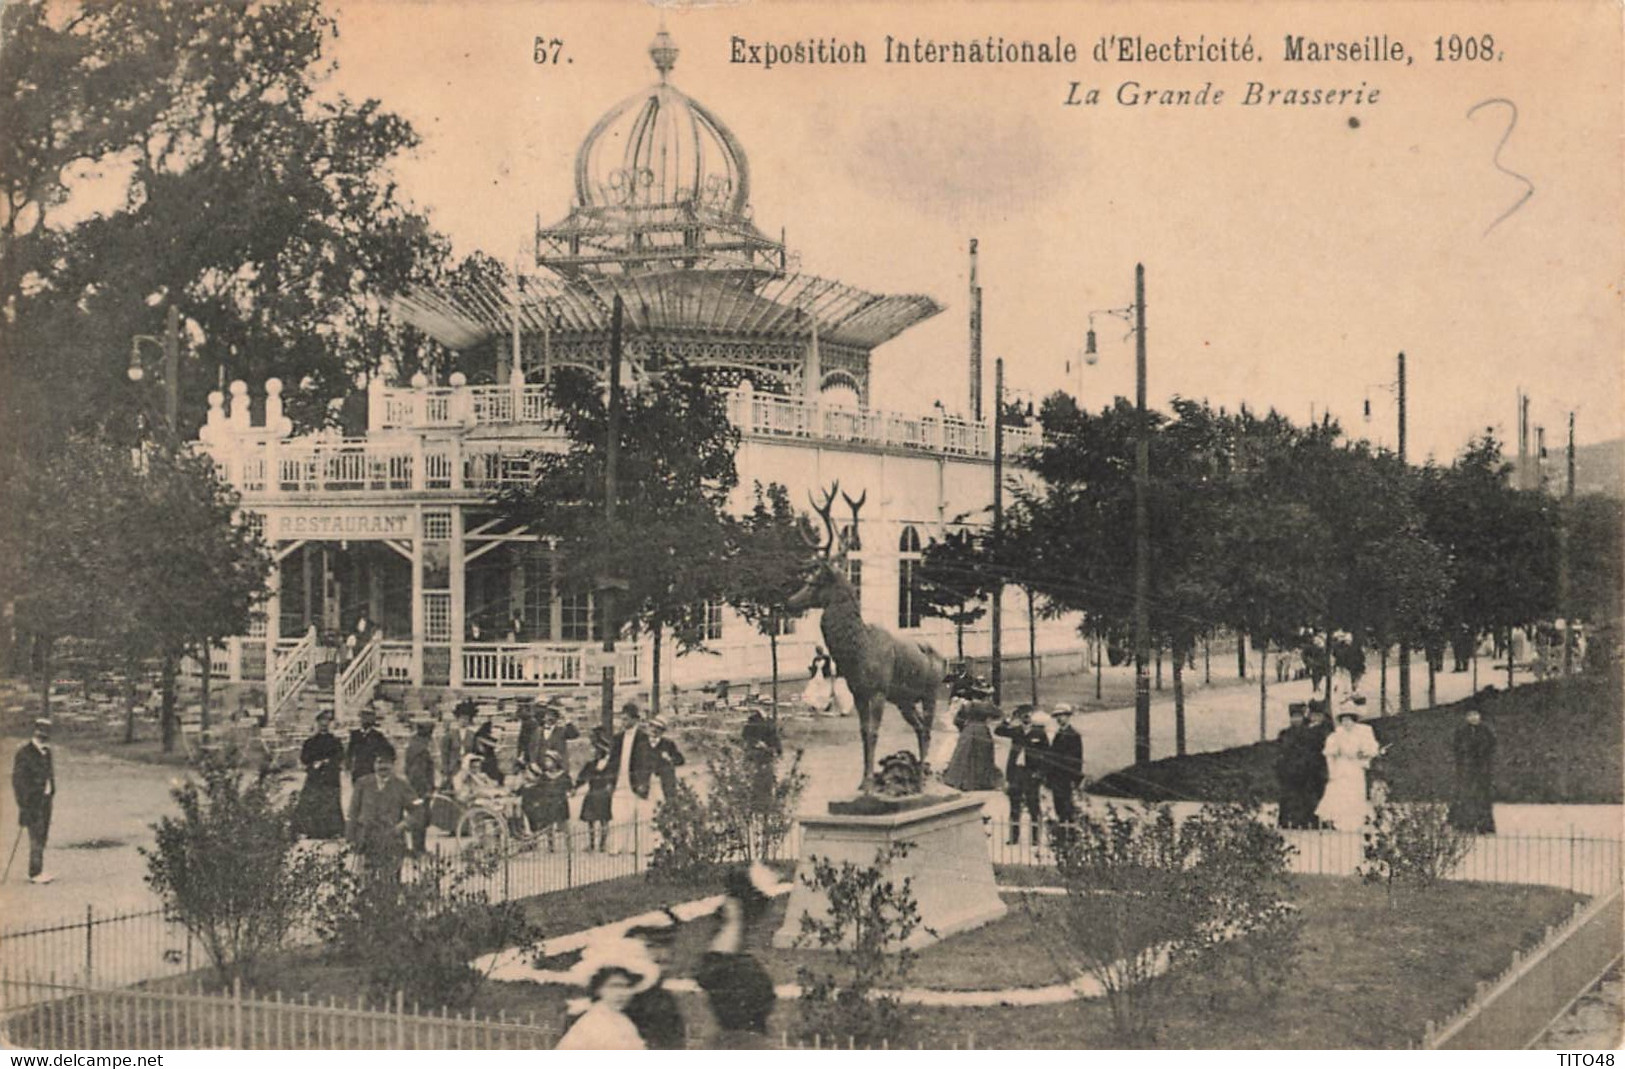 France (13 Marseille) - Exposition Internationale D'Electricité 1908 - La Grande Brasserie - Electrical Trade Shows And Other